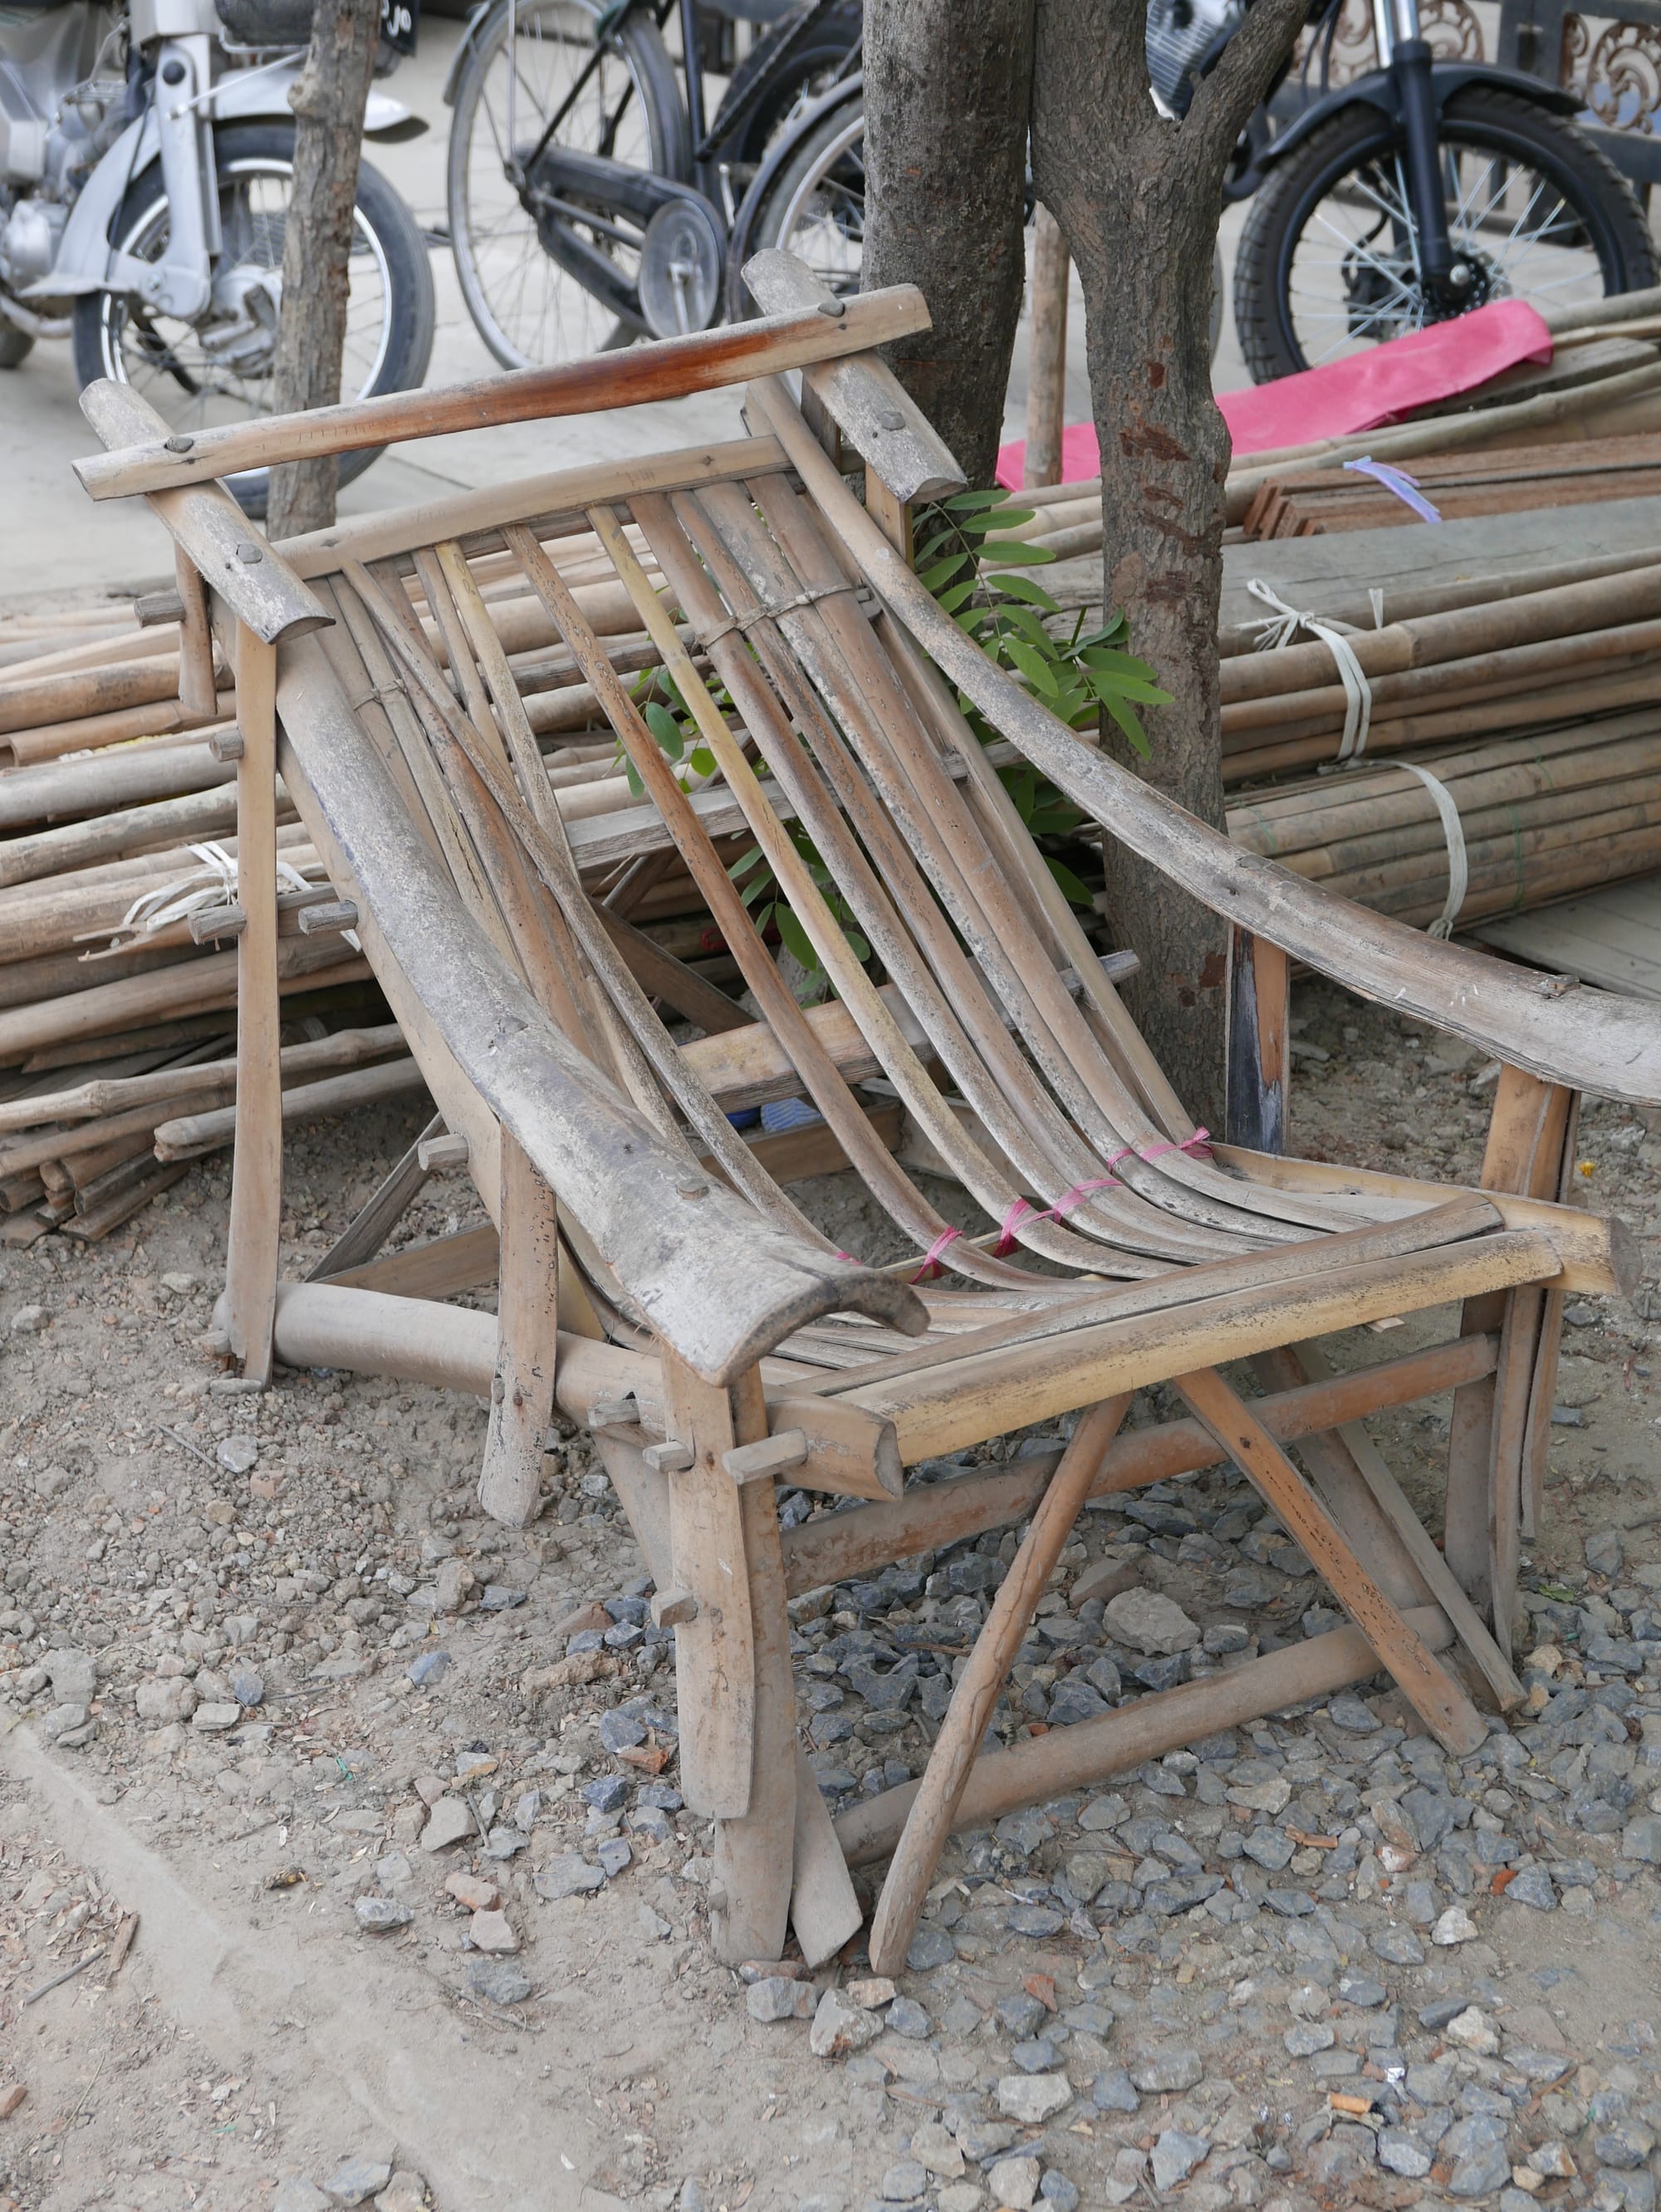 Photo by Author — a popular style of local chair made from bamboo